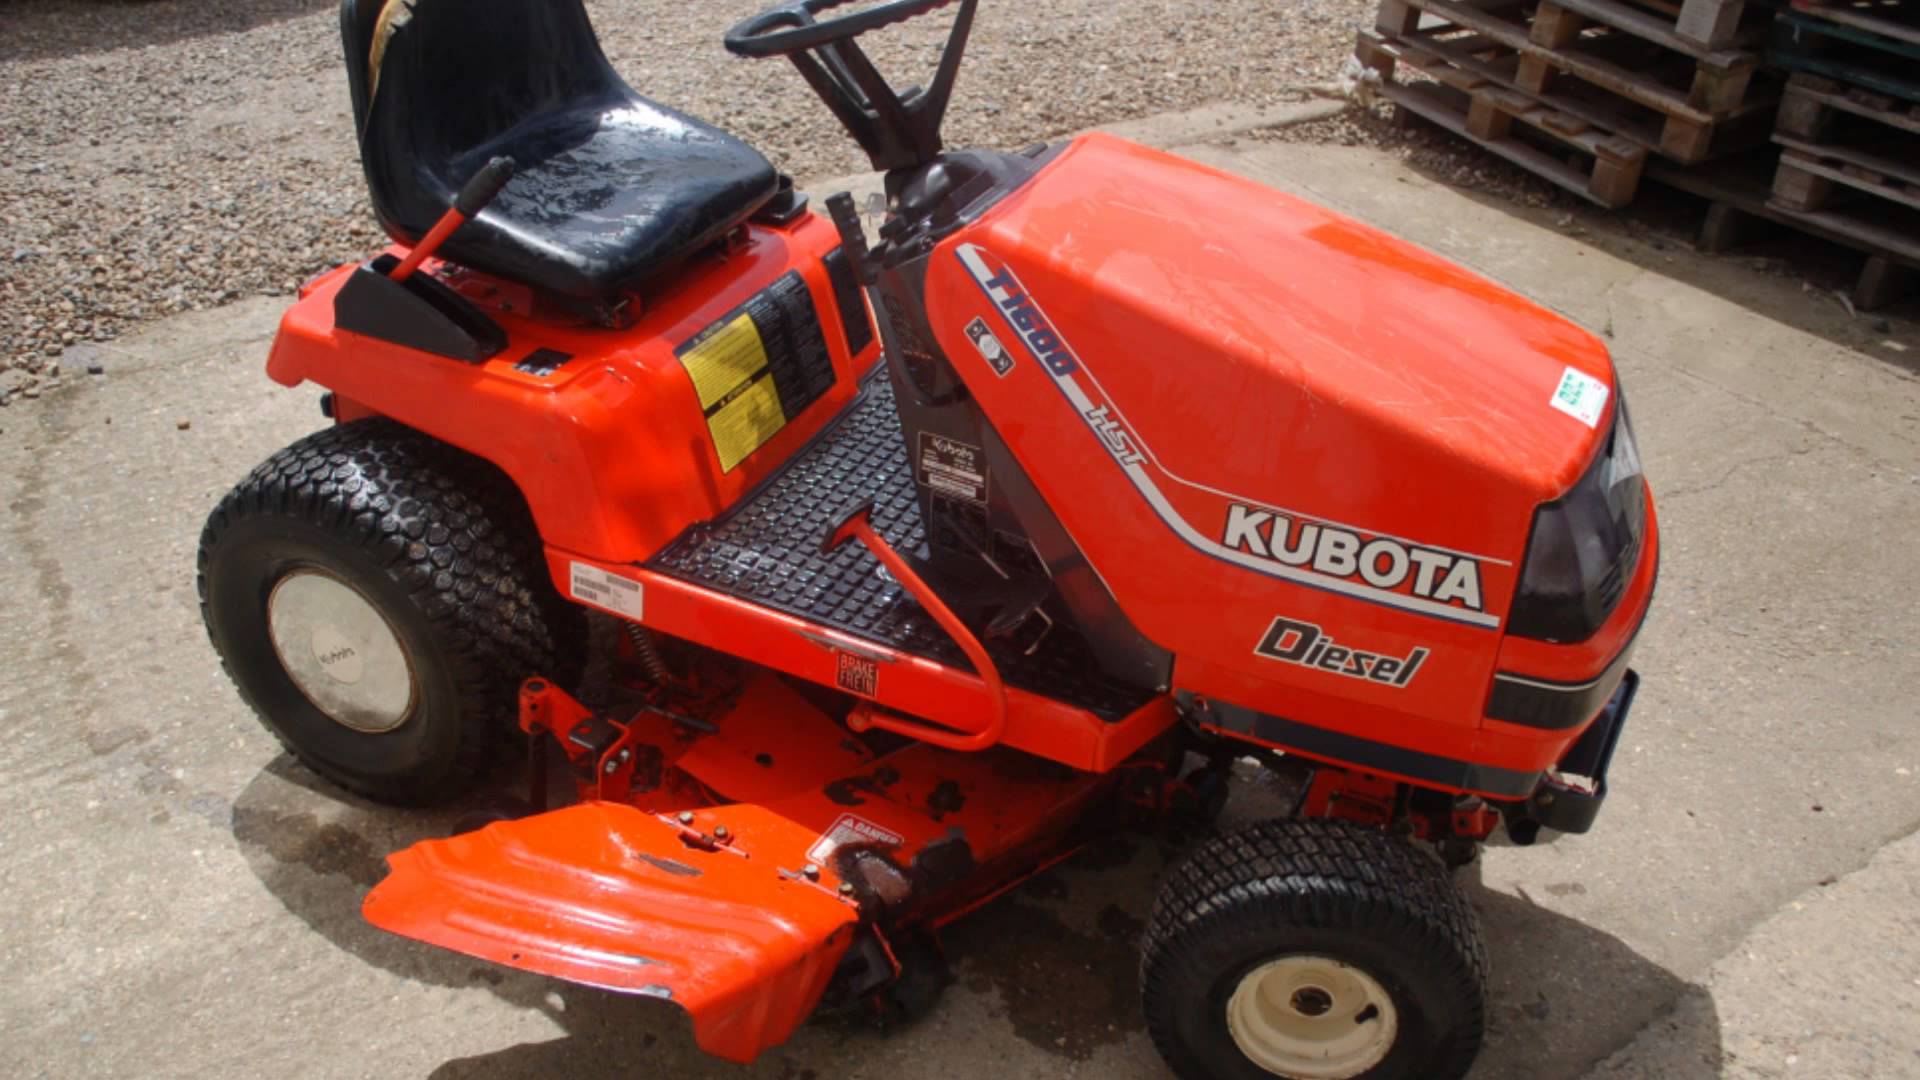 KUBOTA T1600 HST Ride On Mower Tractor - For Sale by On-Line Auction ...